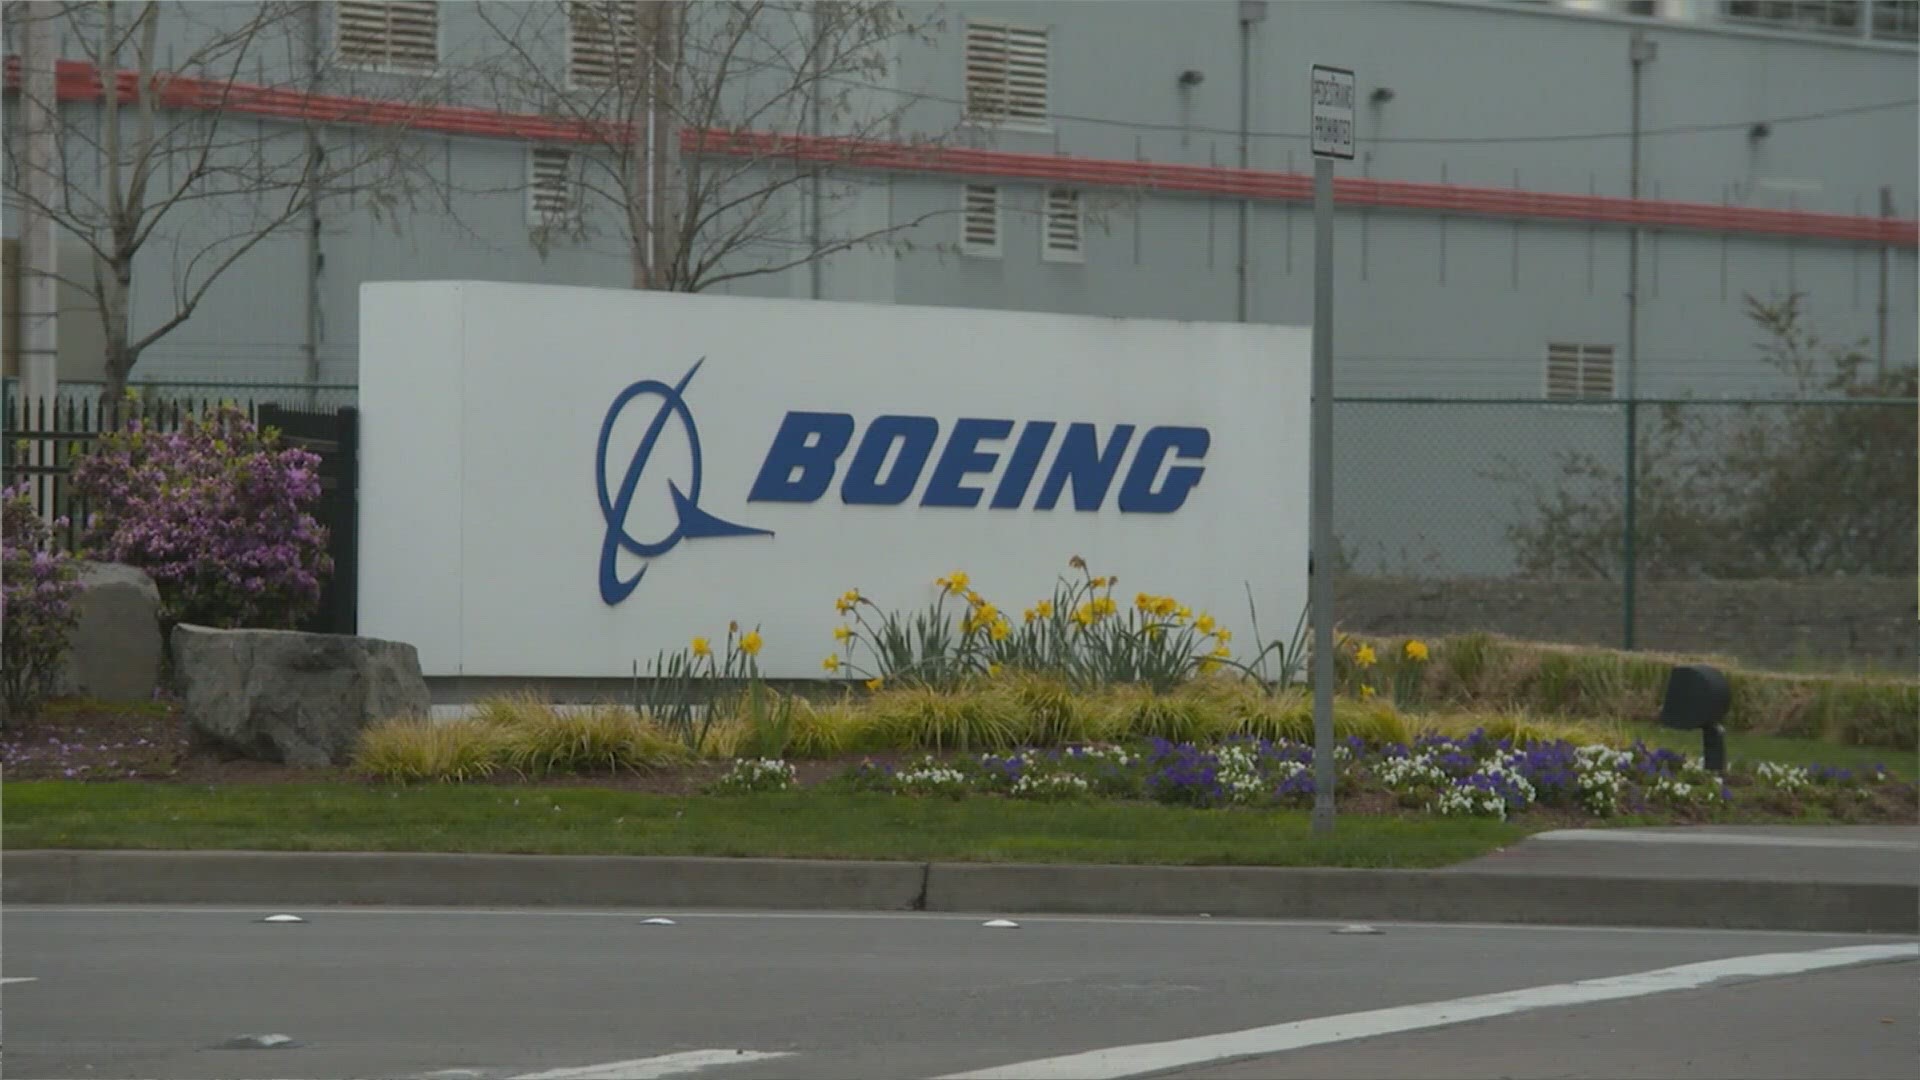 The leadership shakeup comes after a series of safety issues raised concerns about quality control on Boeing's planes.